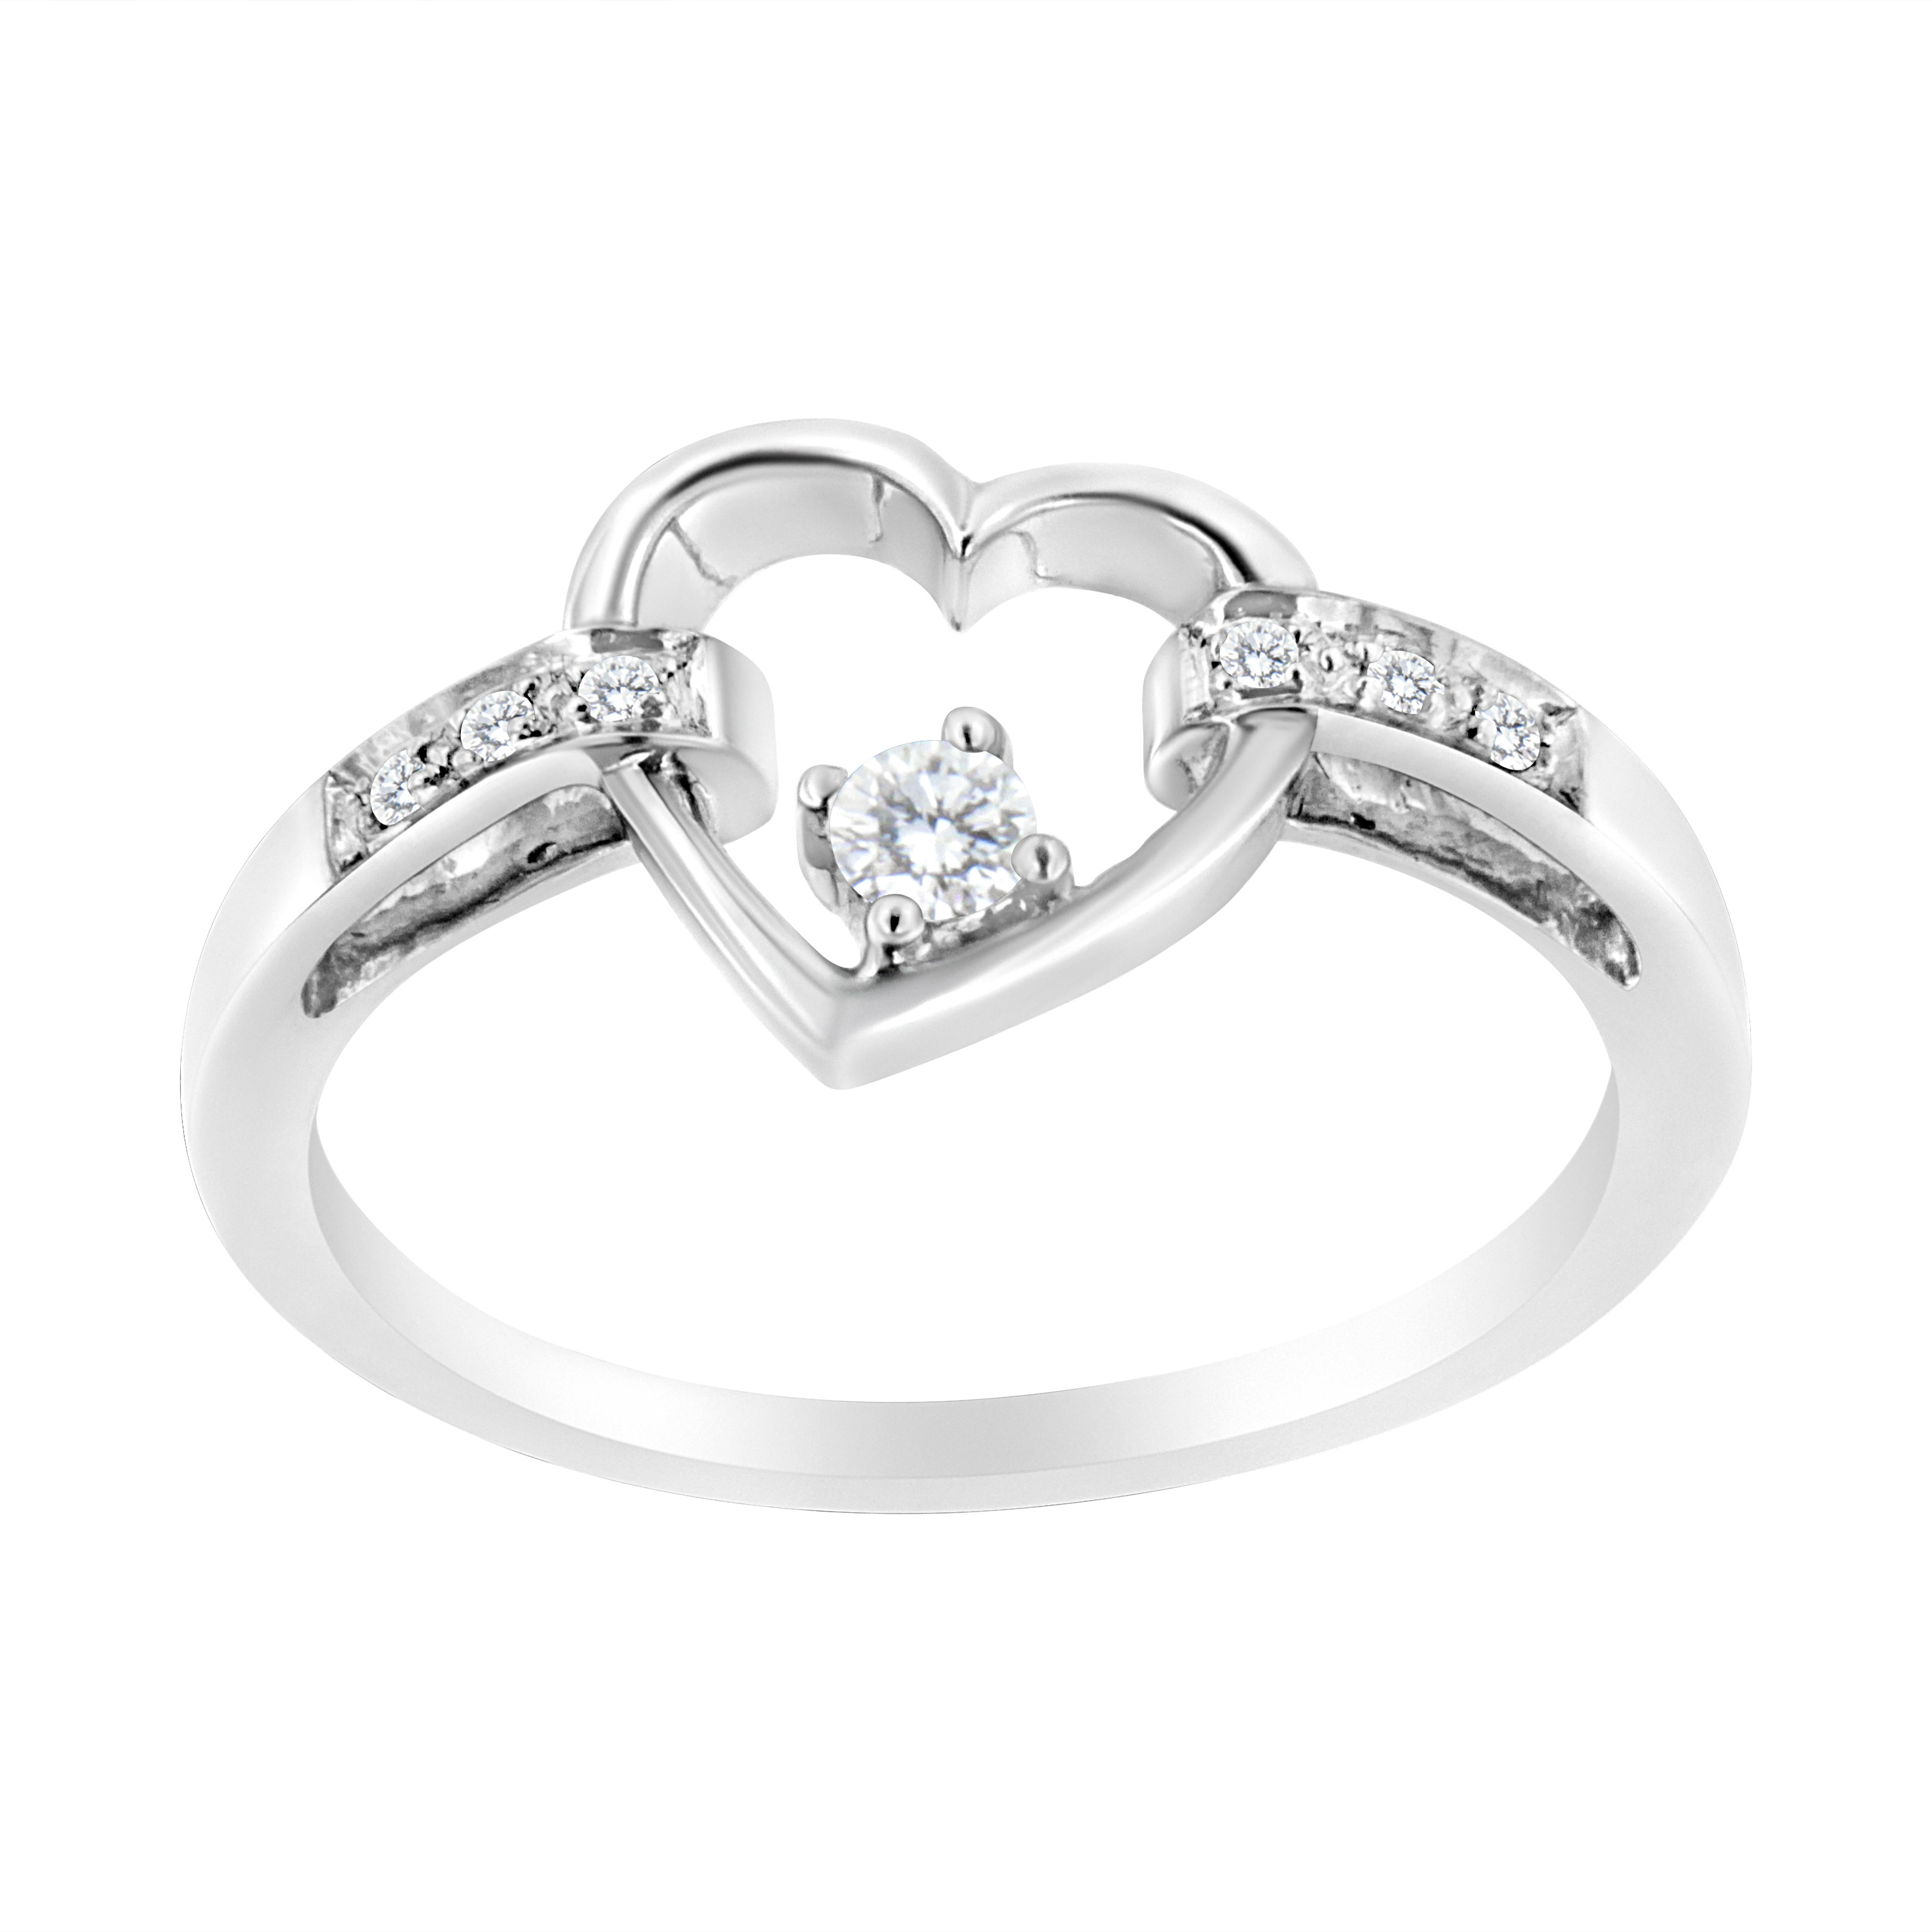 Gift your loved one with this cherished 1/8 c.t. diamond heart ring! This petite and elegant piece is crafted in 14k white gold, a metal that will stay tarnish free for years to come! It has an open heart motif at the center of the band with three